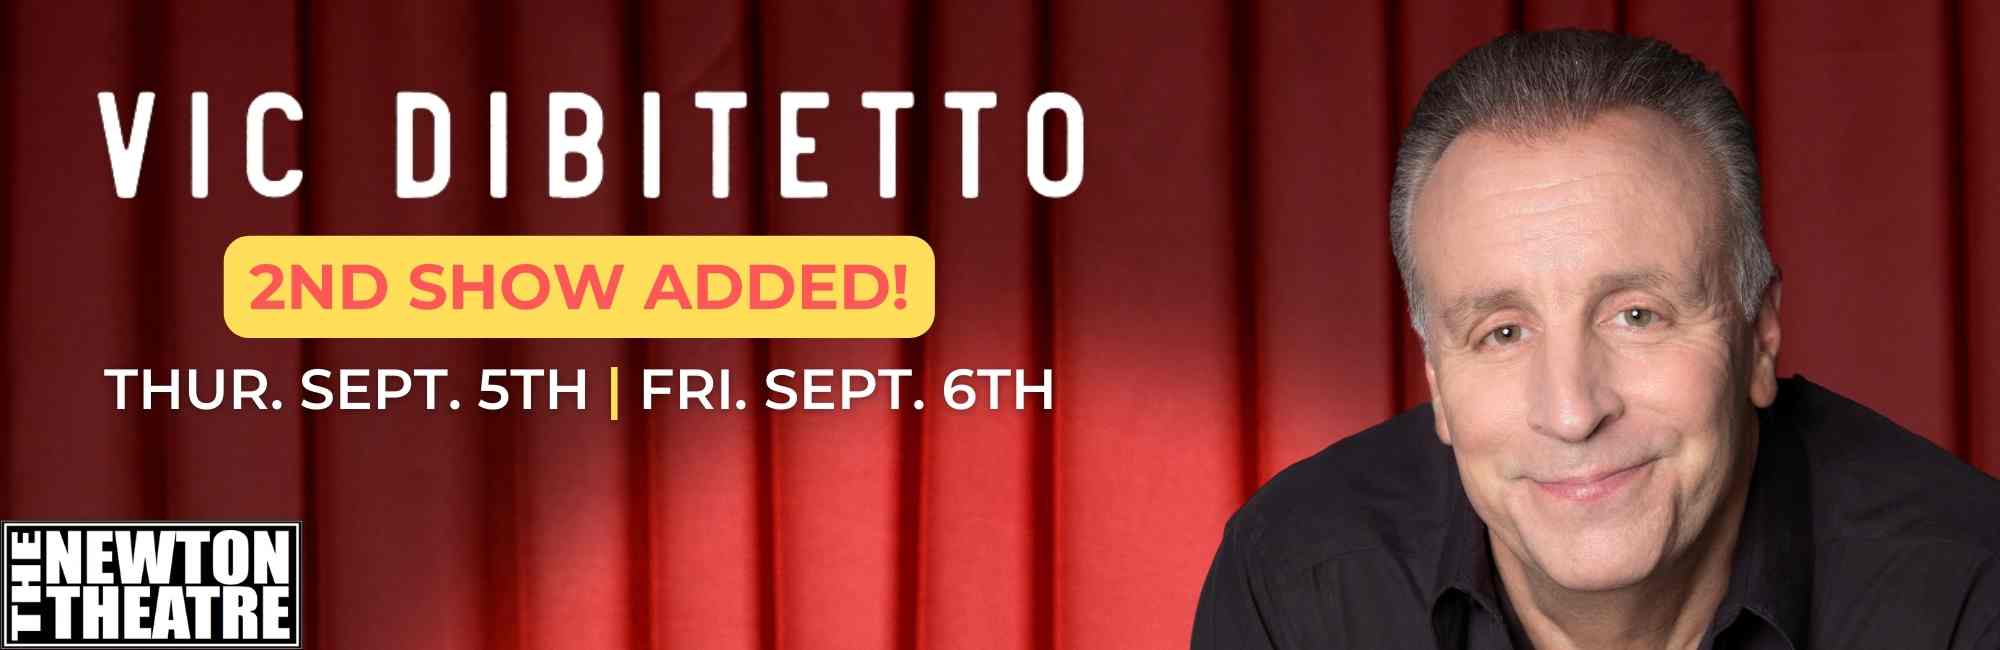 Vic Dibitetto comes to The Newton Theatre on Thursday, September 5th & Friday, September 6th.